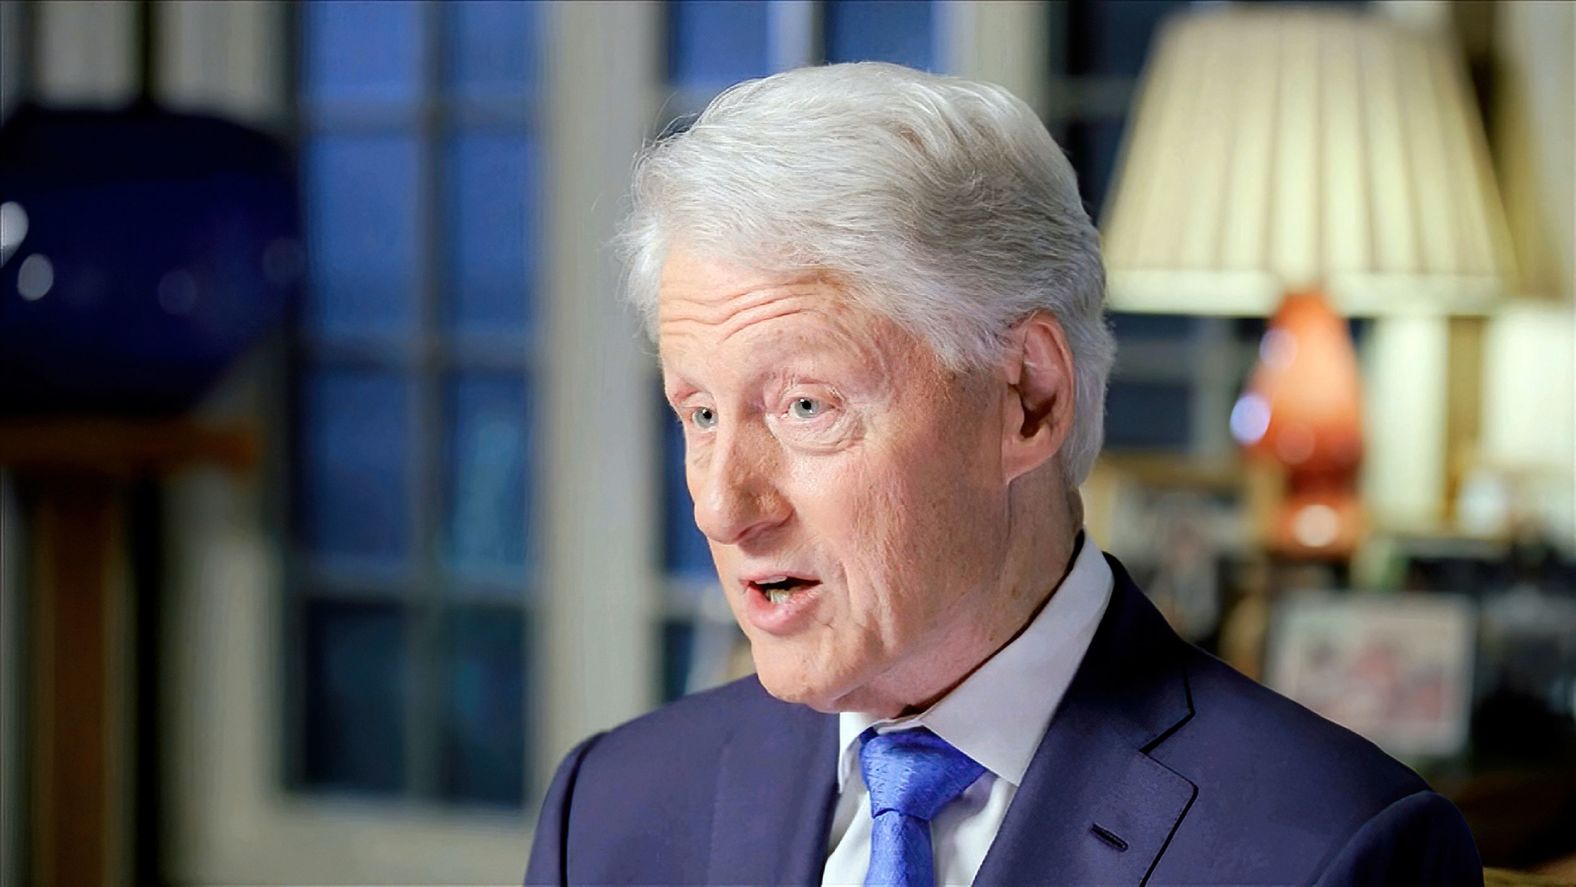 Former President Bill Clinton speaks on Tuesday. <a href="index.php?page=&url=https%3A%2F%2Fwww.cnn.com%2Fpolitics%2Flive-news%2Fdnc-2020-day-2%2Fh_7fbf119156b43c84d5e0dcd7ca005530" target="_blank">Clinton lambasted Trump,</a> questioning his handling of the coronavirus pandemic and casting his White House as a chaotic "storm."